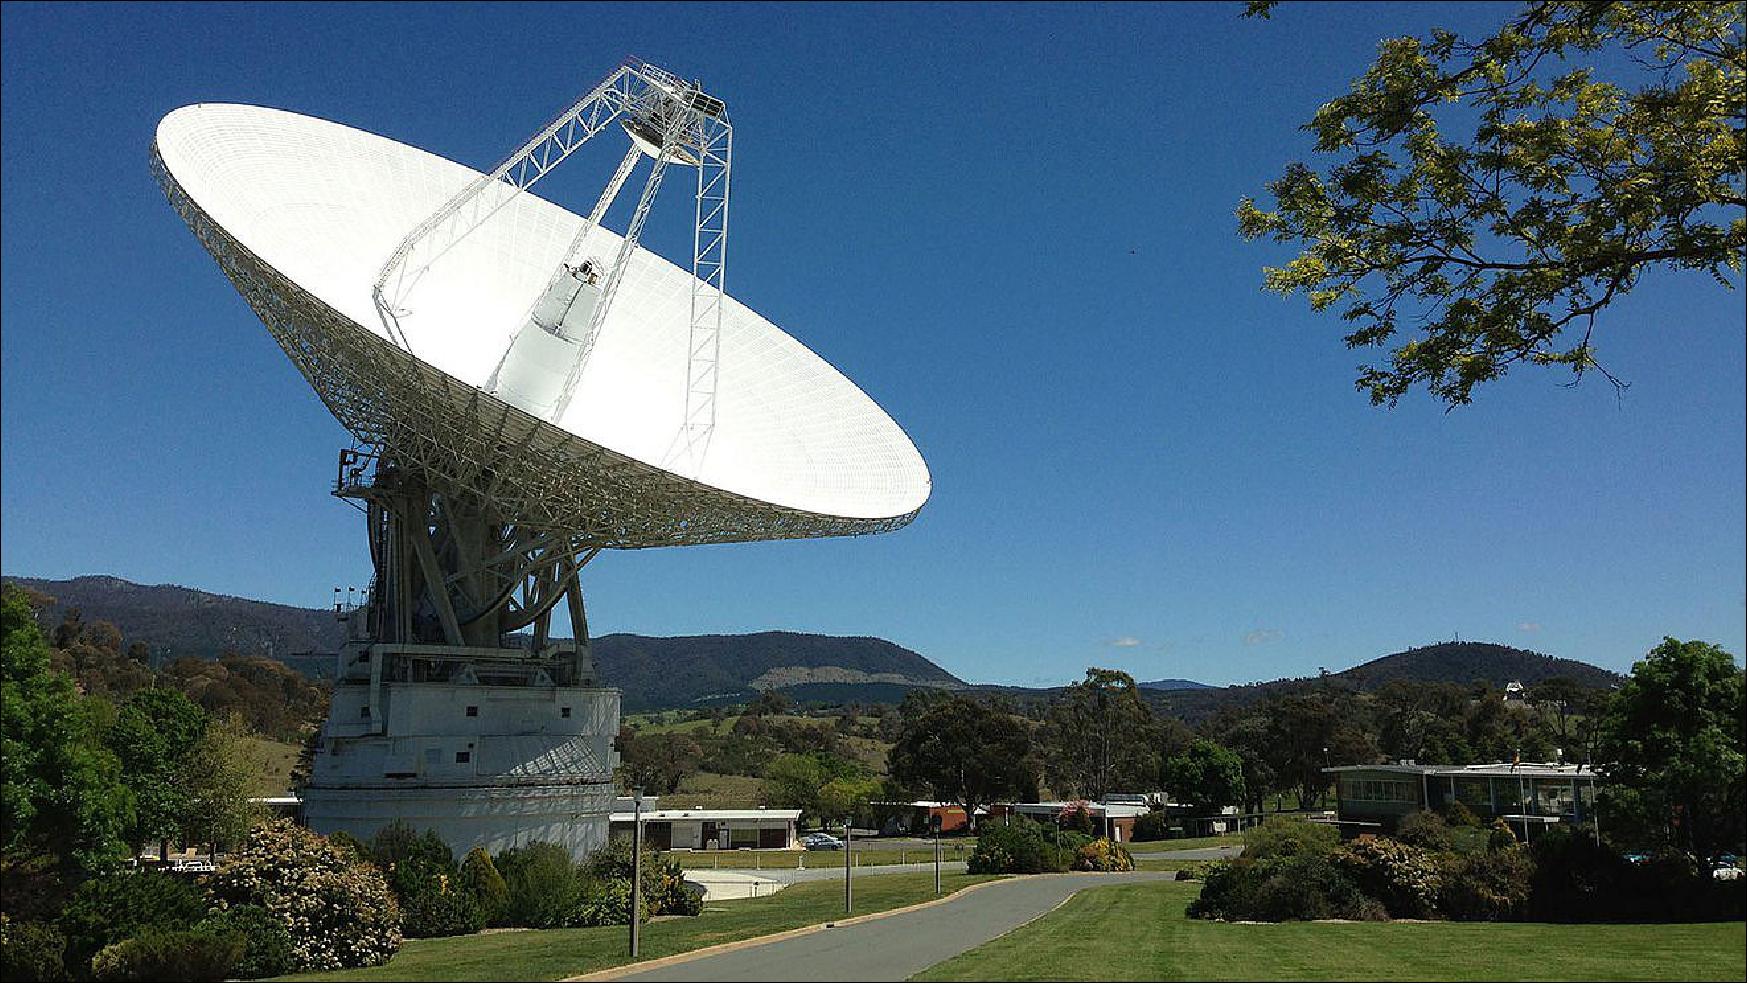 Figure 17: DSS-43 is a 70-meter-wide radio antenna at the Deep Space Network's Canberra facility in Australia. It is the only antenna that can send commands to the Voyager 2 spacecraft (image credit: NASA/Canberra Deep Space Communication Complex)